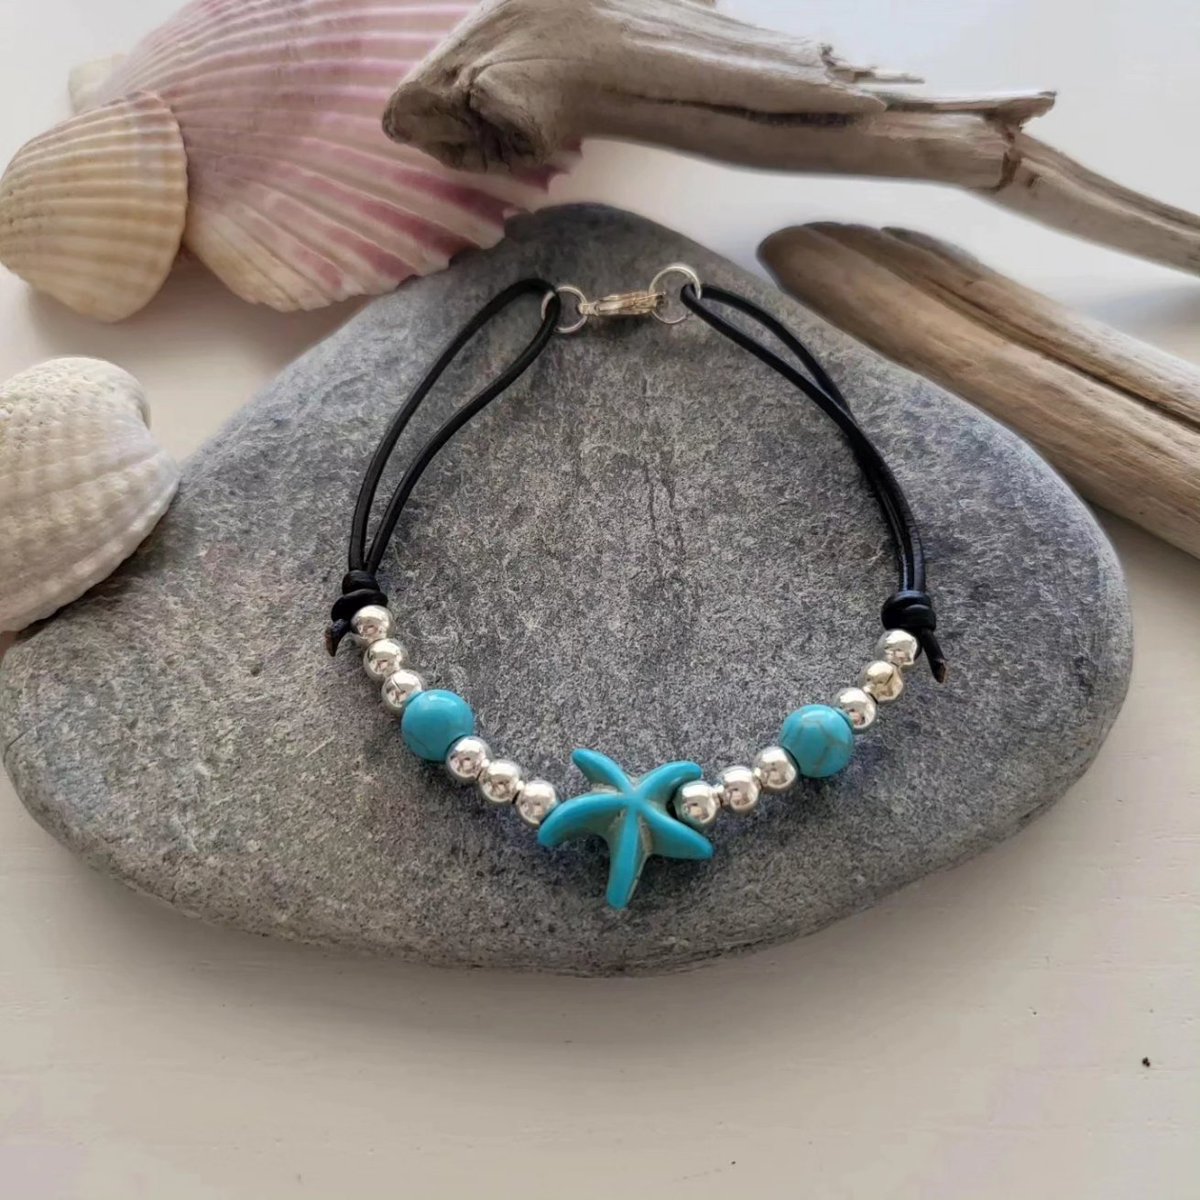 @MHHSBD @Katrinashells Handmade jewellery and gifts. Seashell earrings and necklaces, and wooden beaded anklets and bracelets, all with a beach them